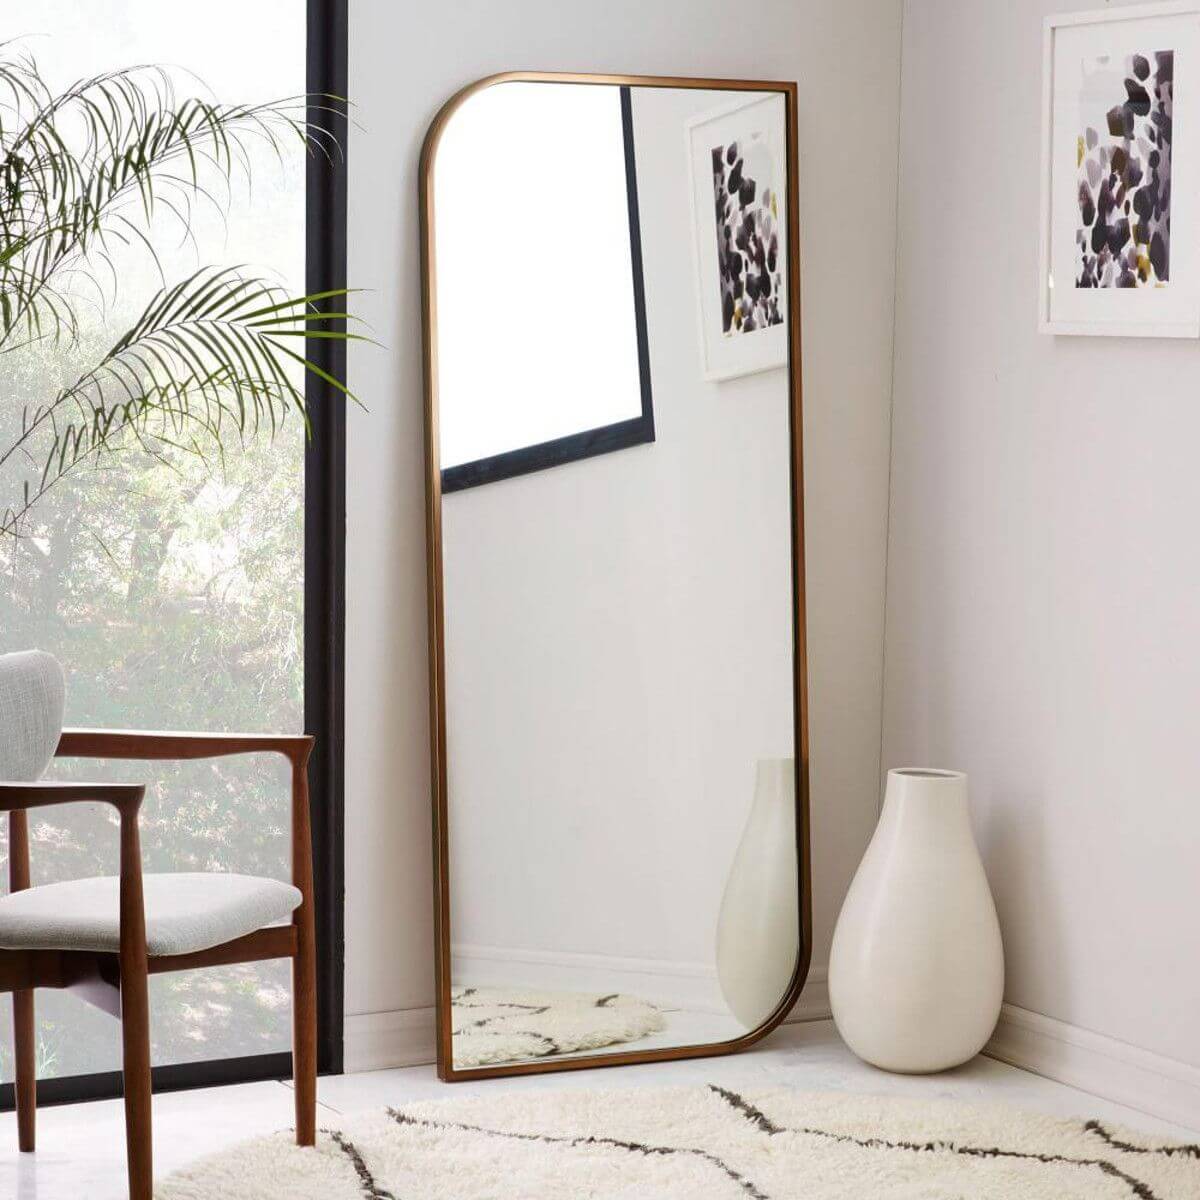 5- Mirrors in decoration